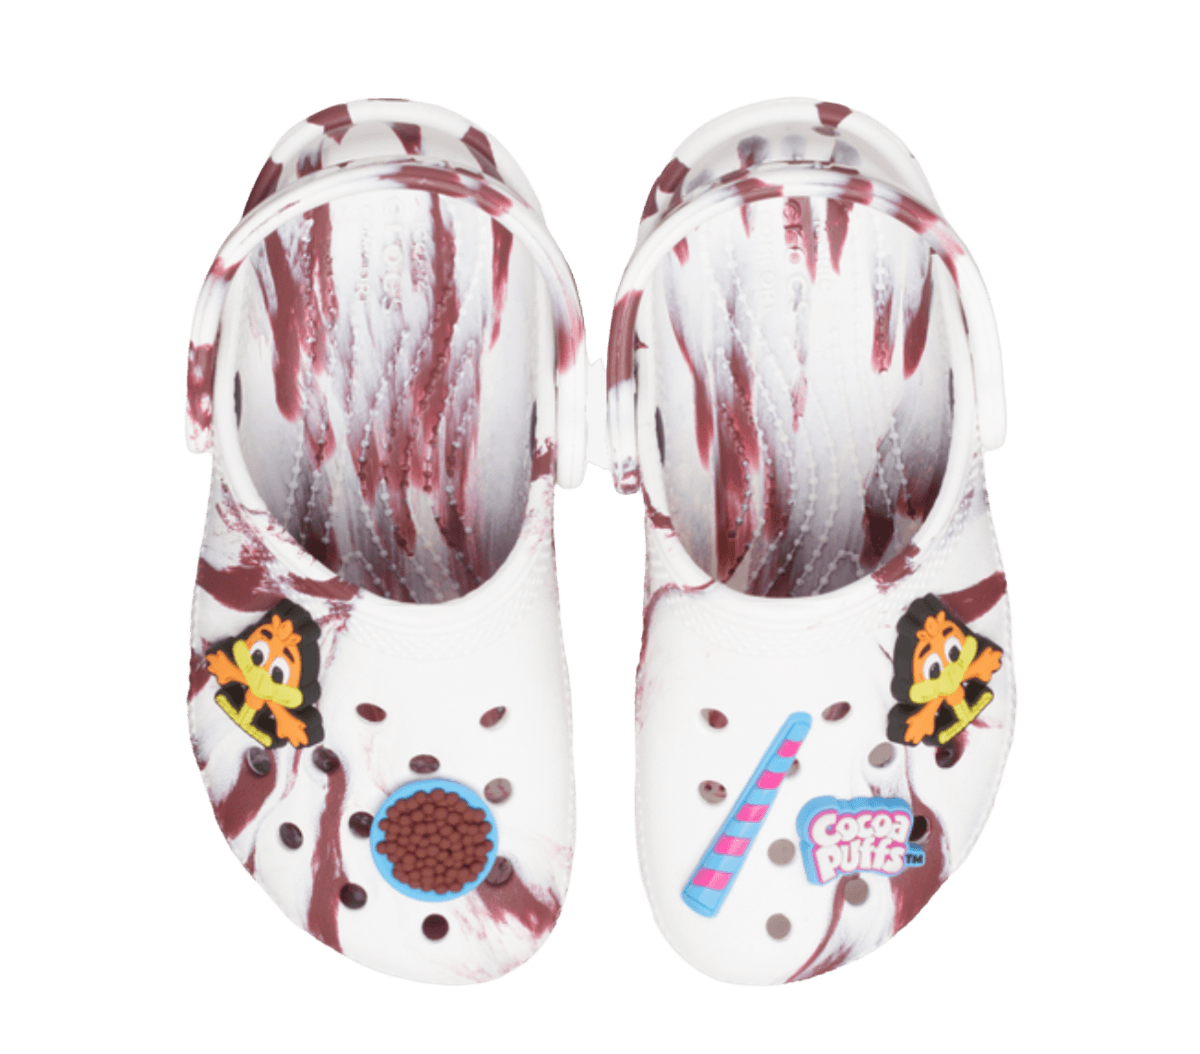 Crocs Classic Clog Cocoa Puffs - Toddler - Shoes - Crocs - Jawns on Fire - sneakers